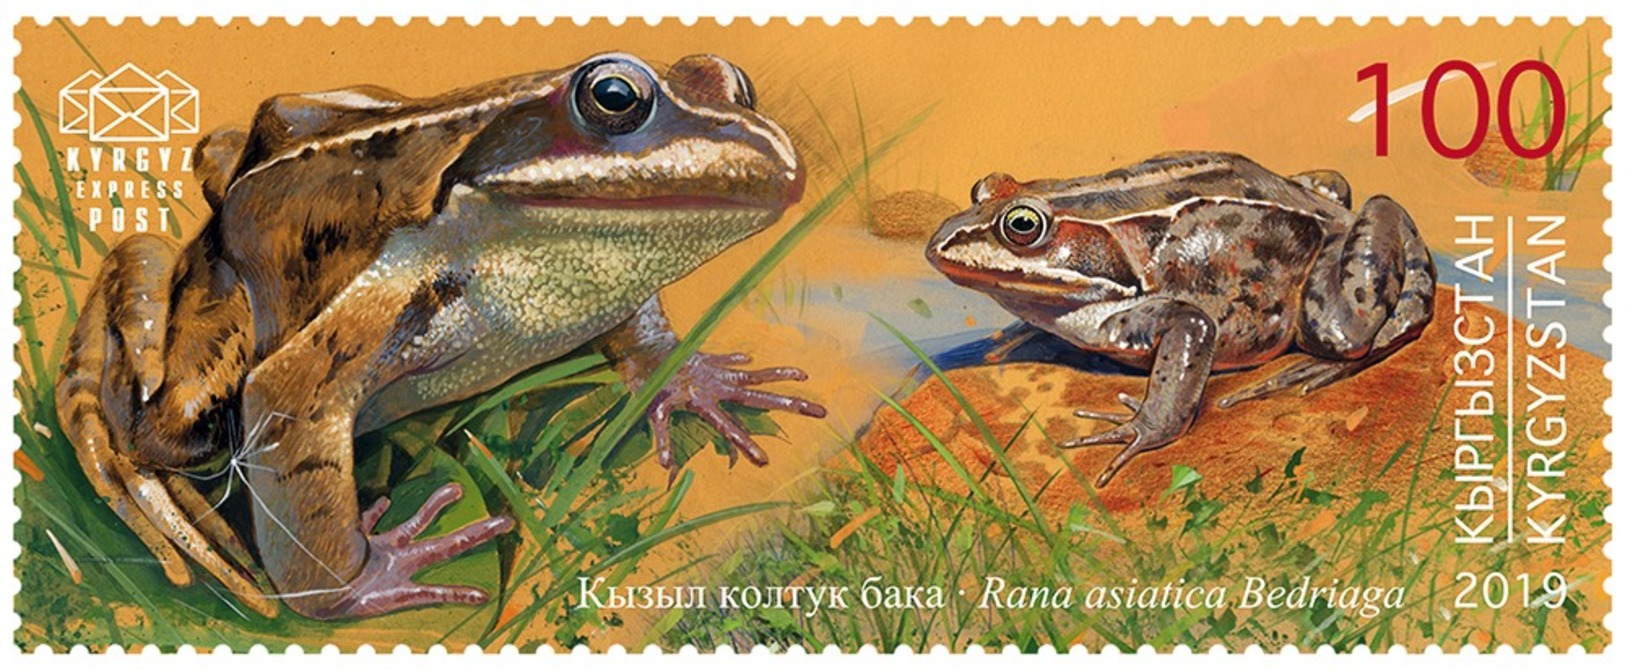 H01 Kyrgyzstan Red List Red Book Rote Liste Reptiles Frogs Snakes 2019 Mi# 134 MNH - Kyrgyzstan